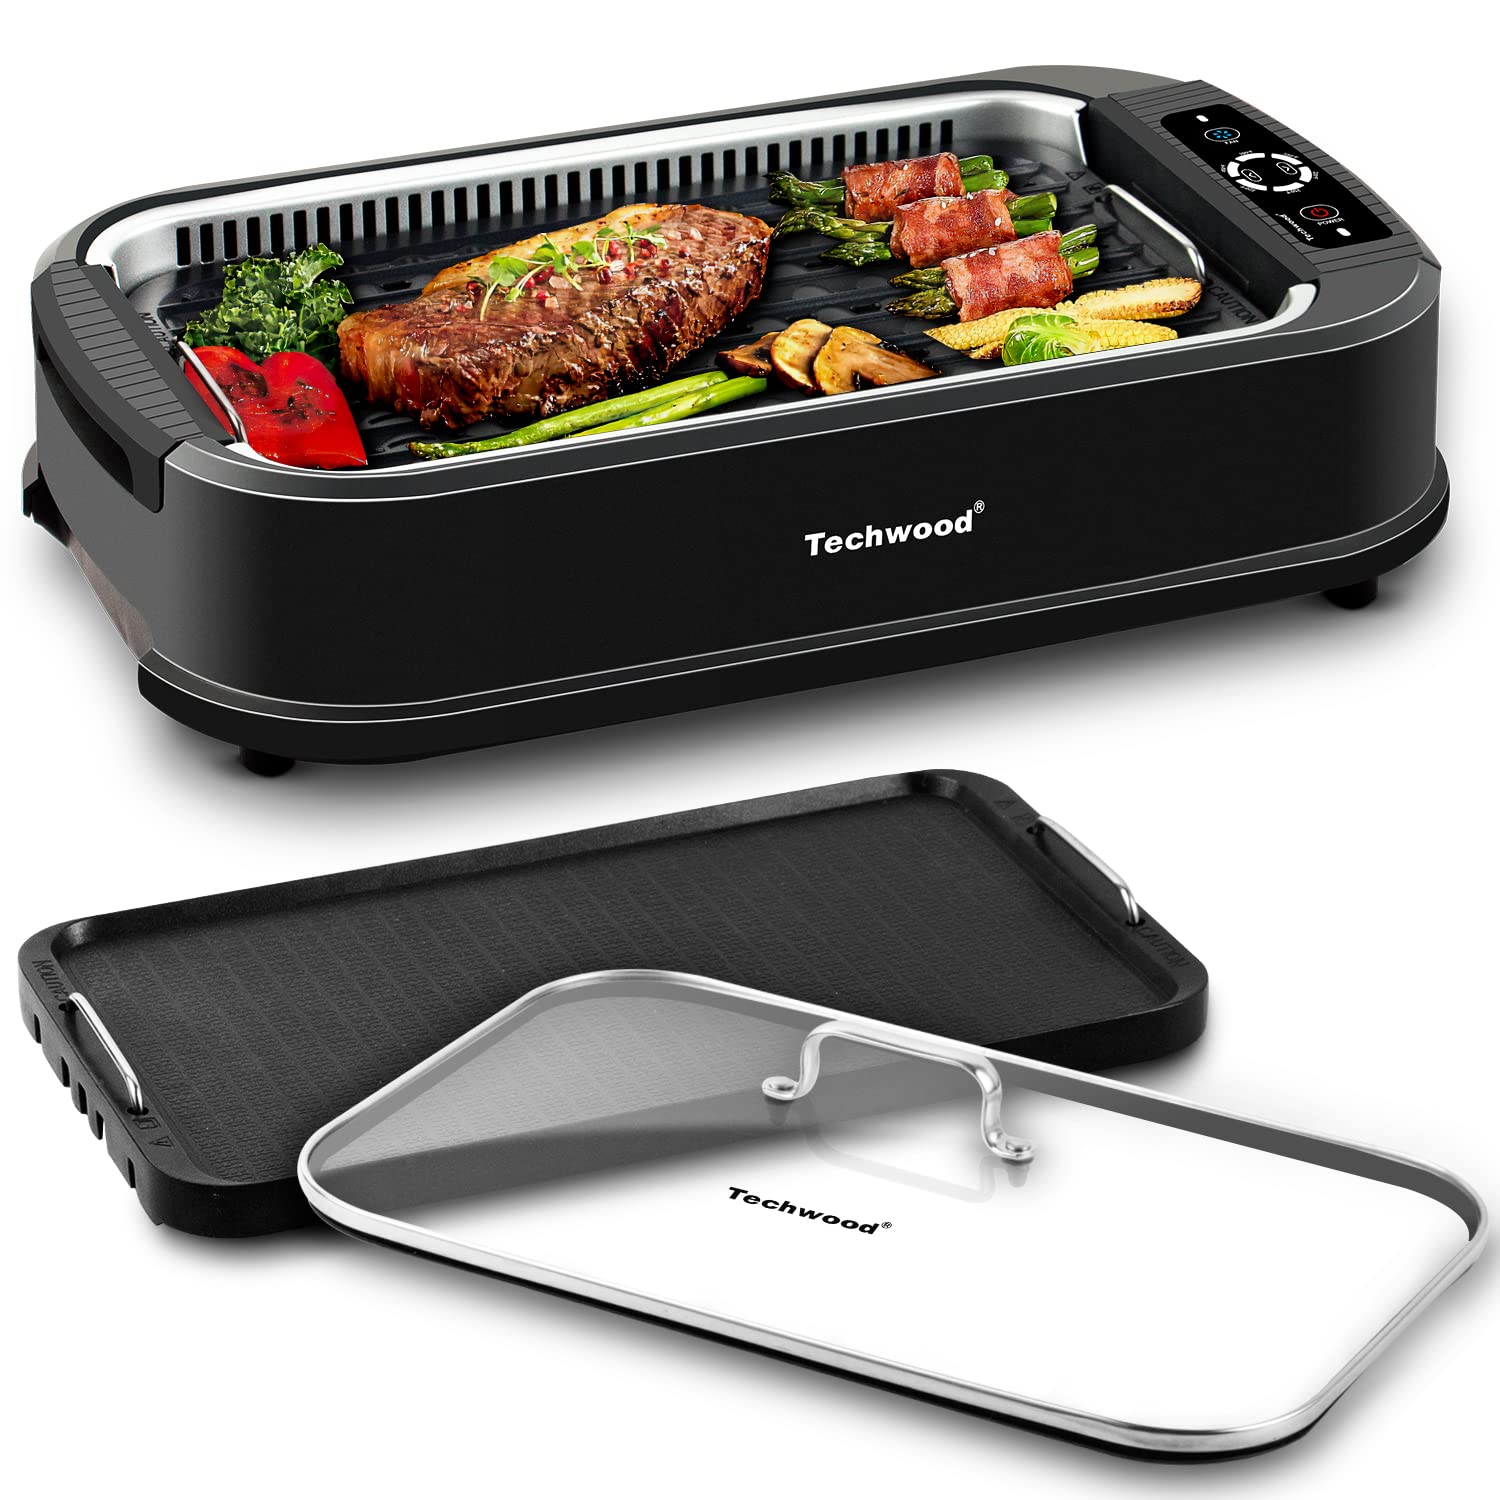 Smokeless Indoor Grill,Electric Grill Non-Stick Cooking Removable